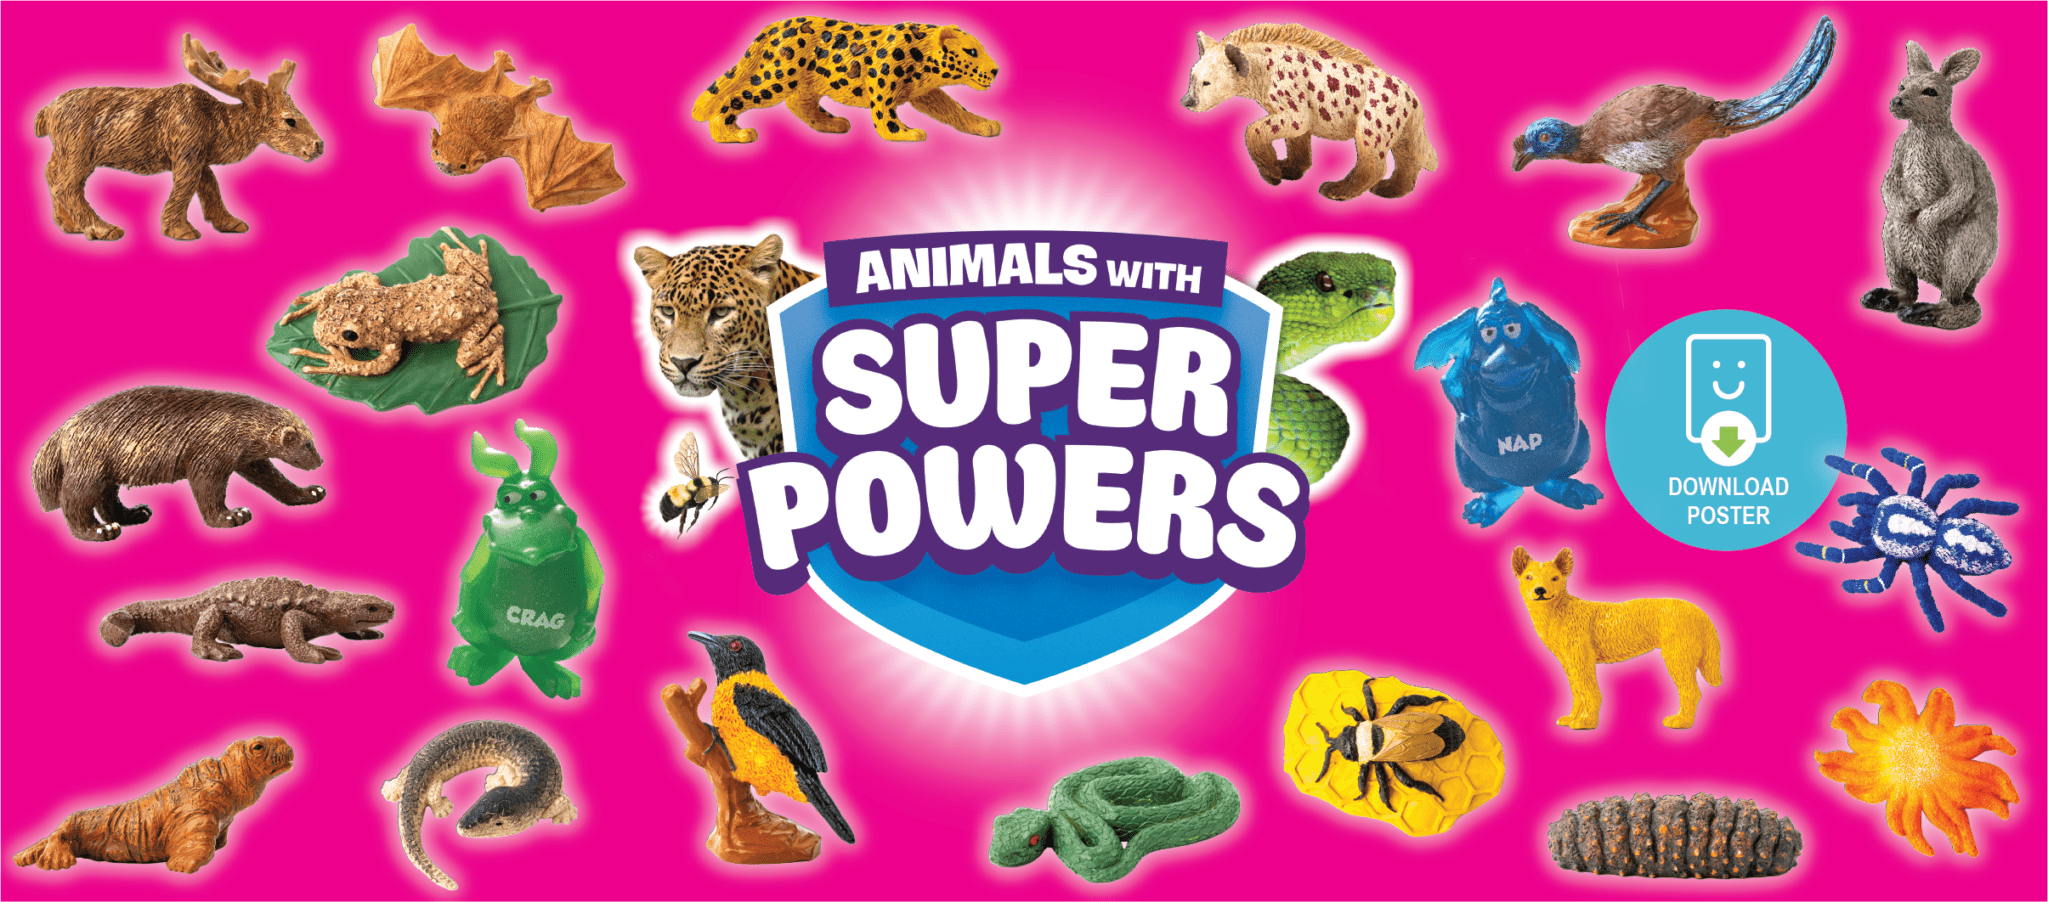 Animals with superpowers will come as a new 2021 Yowie USA series - Page 2 Animals-with-superpowers-2048x902